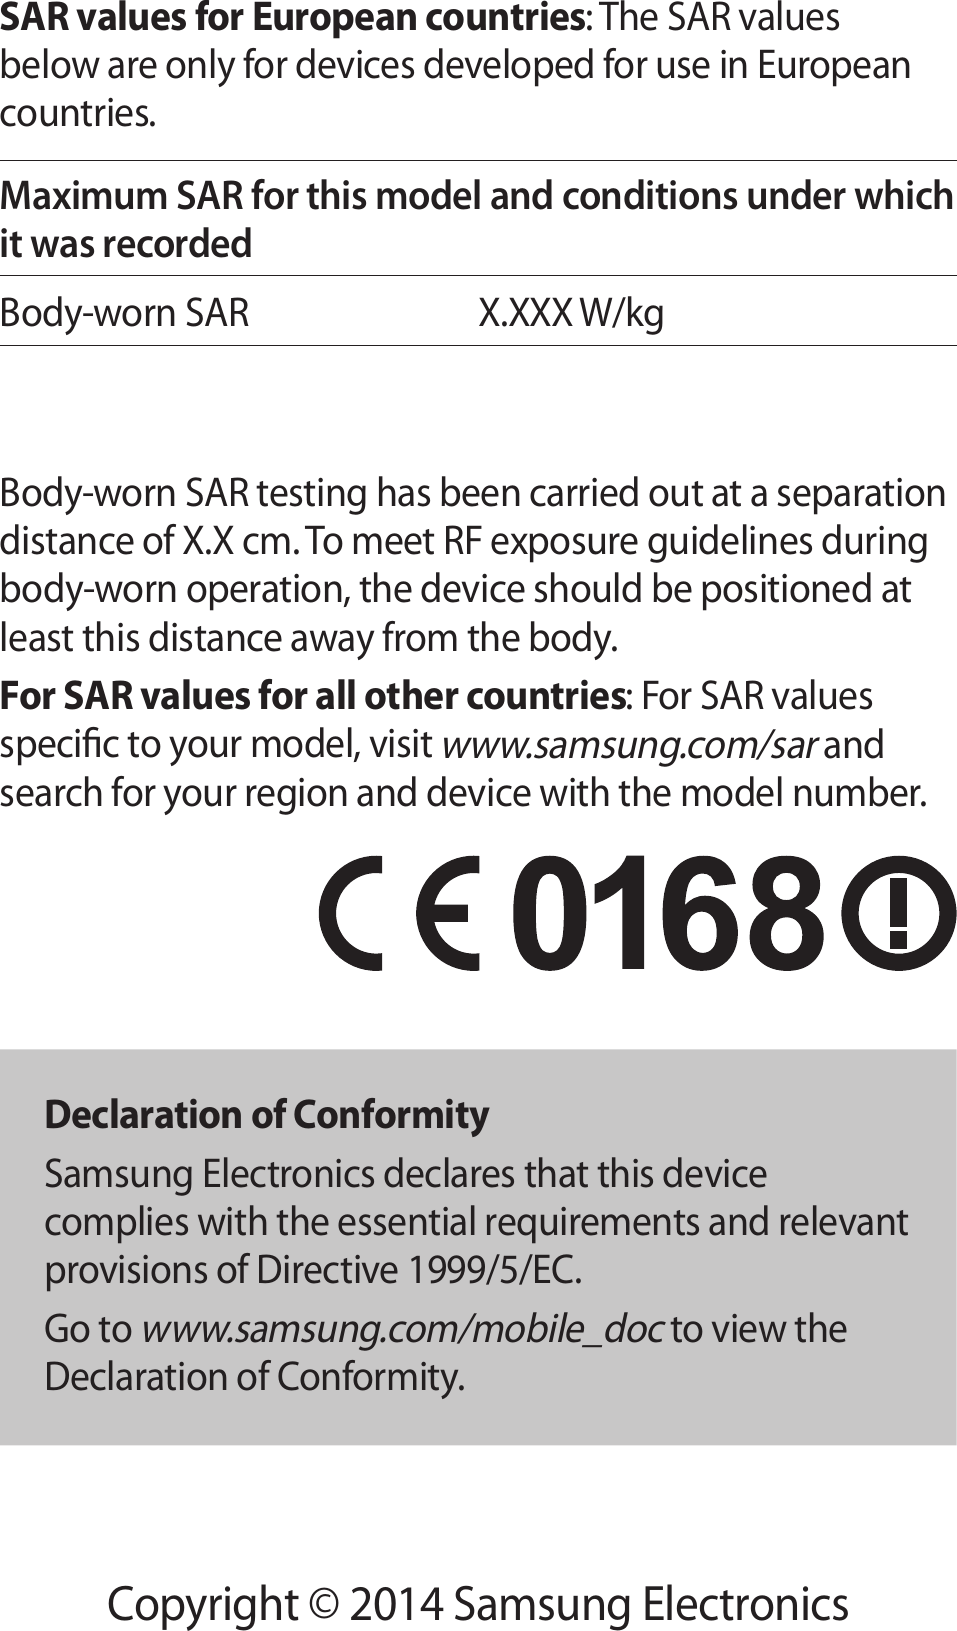 Copyright © 2014 Samsung ElectronicsSAR values for European countries: The SAR values below are only for devices developed for use in European countries.Maximum SAR for this model and conditions under which it was recordedBody-worn SARX.XXX W/kgBody-worn SAR testing has been carried out at a separation distance of X.X cm. To meet RF exposure guidelines during body-worn operation, the device should be positioned at least this distance away from the body.For SAR values for all other countries: For SAR values specic to your model, visit www.samsung.com/sar and search for your region and device with the model number.Declaration of ConformitySamsung Electronics declares that this device complies with the essential requirements and relevant provisions of Directive 1999/5/EC.Go to www.samsung.com/mobile_doc to view the Declaration of Conformity.